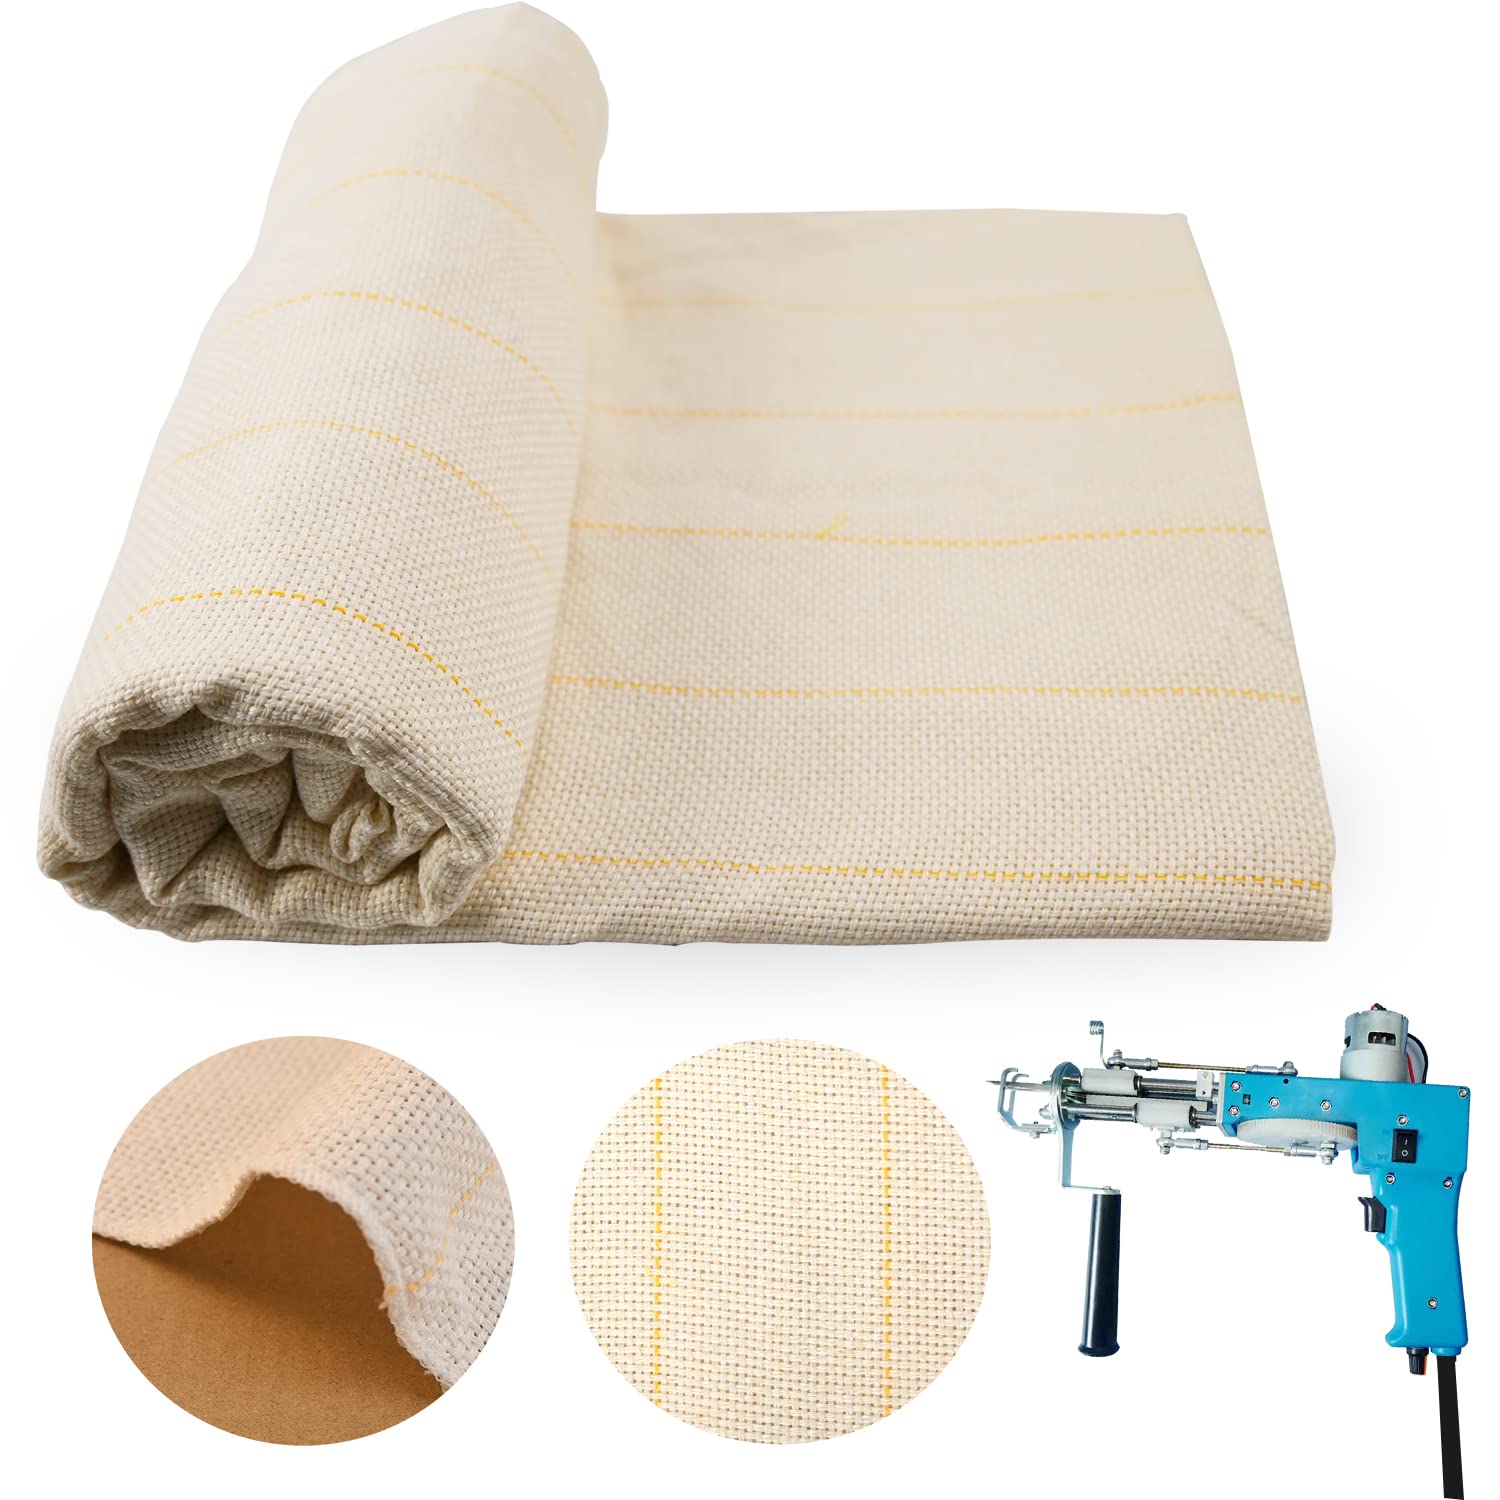 83 x 39 Upgraded Overlocking Tufting Cloth with Marked Lines Large Monk's  Cloth for Tufting Gun & Rug Tufting Fabric/Primary Tufting Cloth/Monk Cloth  for Rug Tufting/Carpet Tufting Cloth 1m x 2.1m